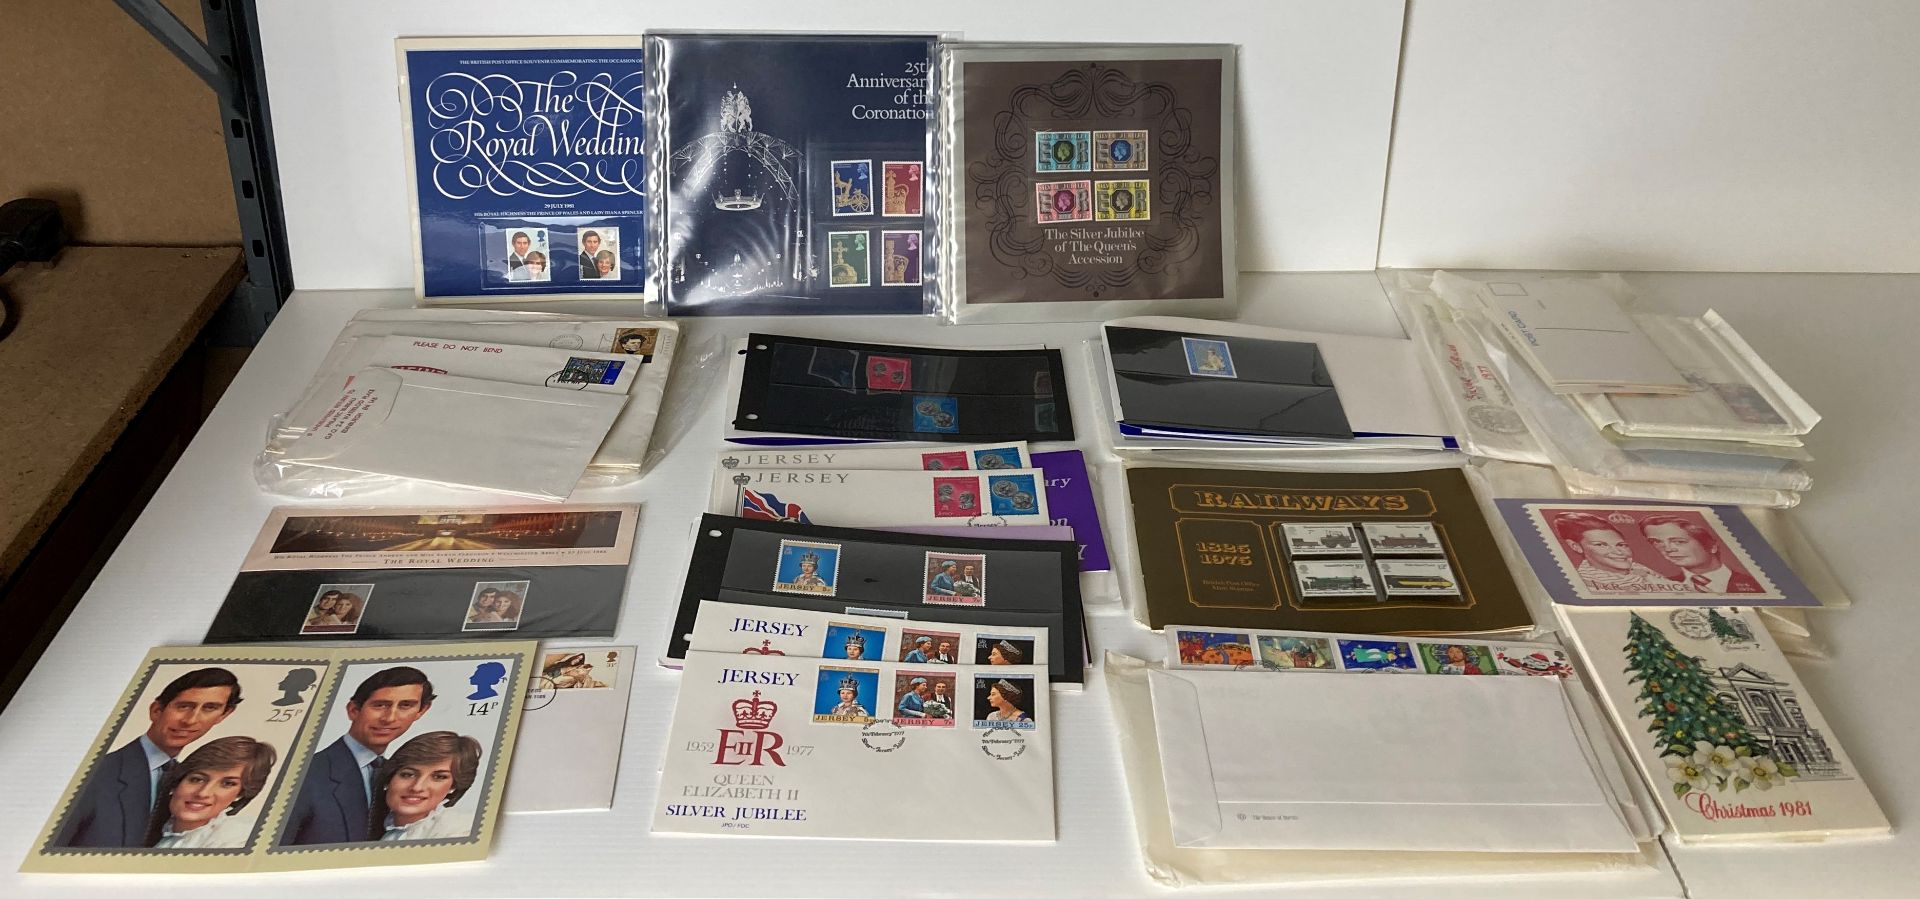 Contents to box - approximately twenty assorted packs of Royalty Mint stamp packs and assorted